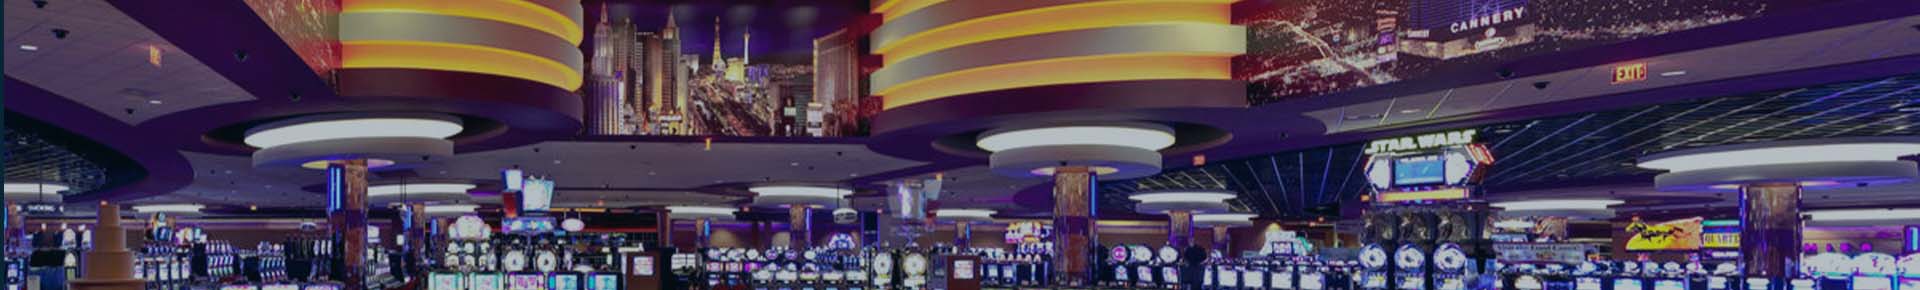 Hollywood Casino at the Meadows